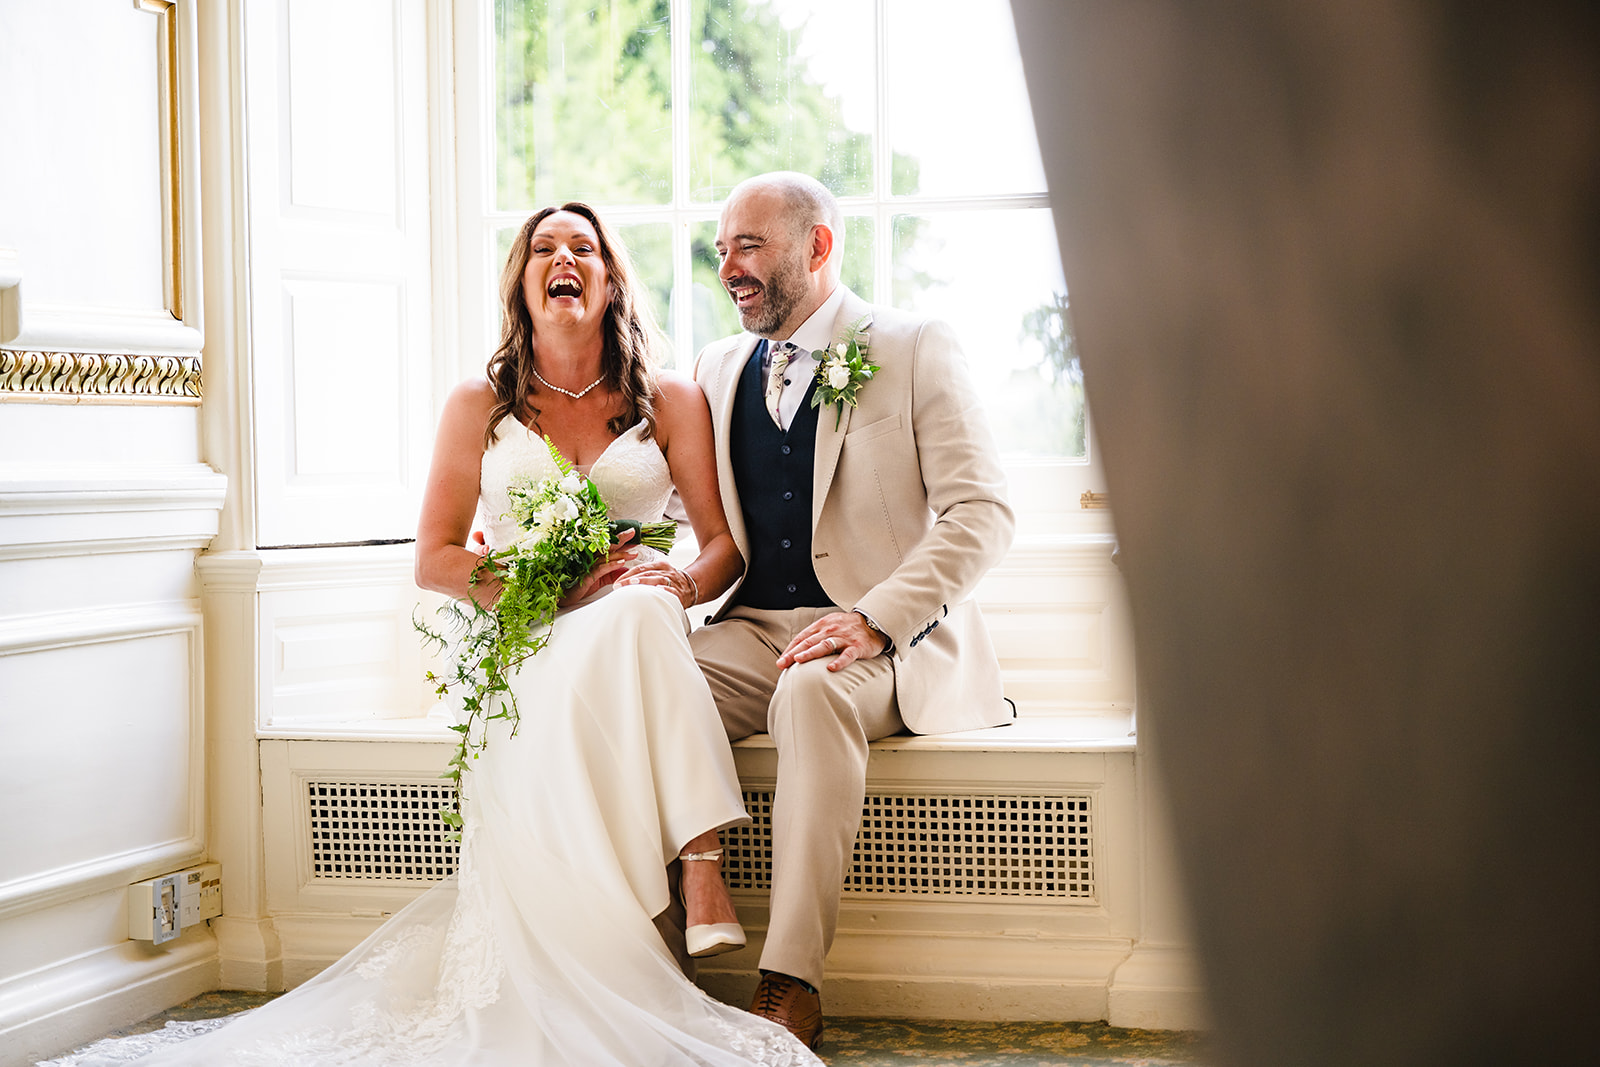 Bride and groom sat on windowsill laughing after their wedding at Stapleford Park Hotel by Amanda Forman Photography